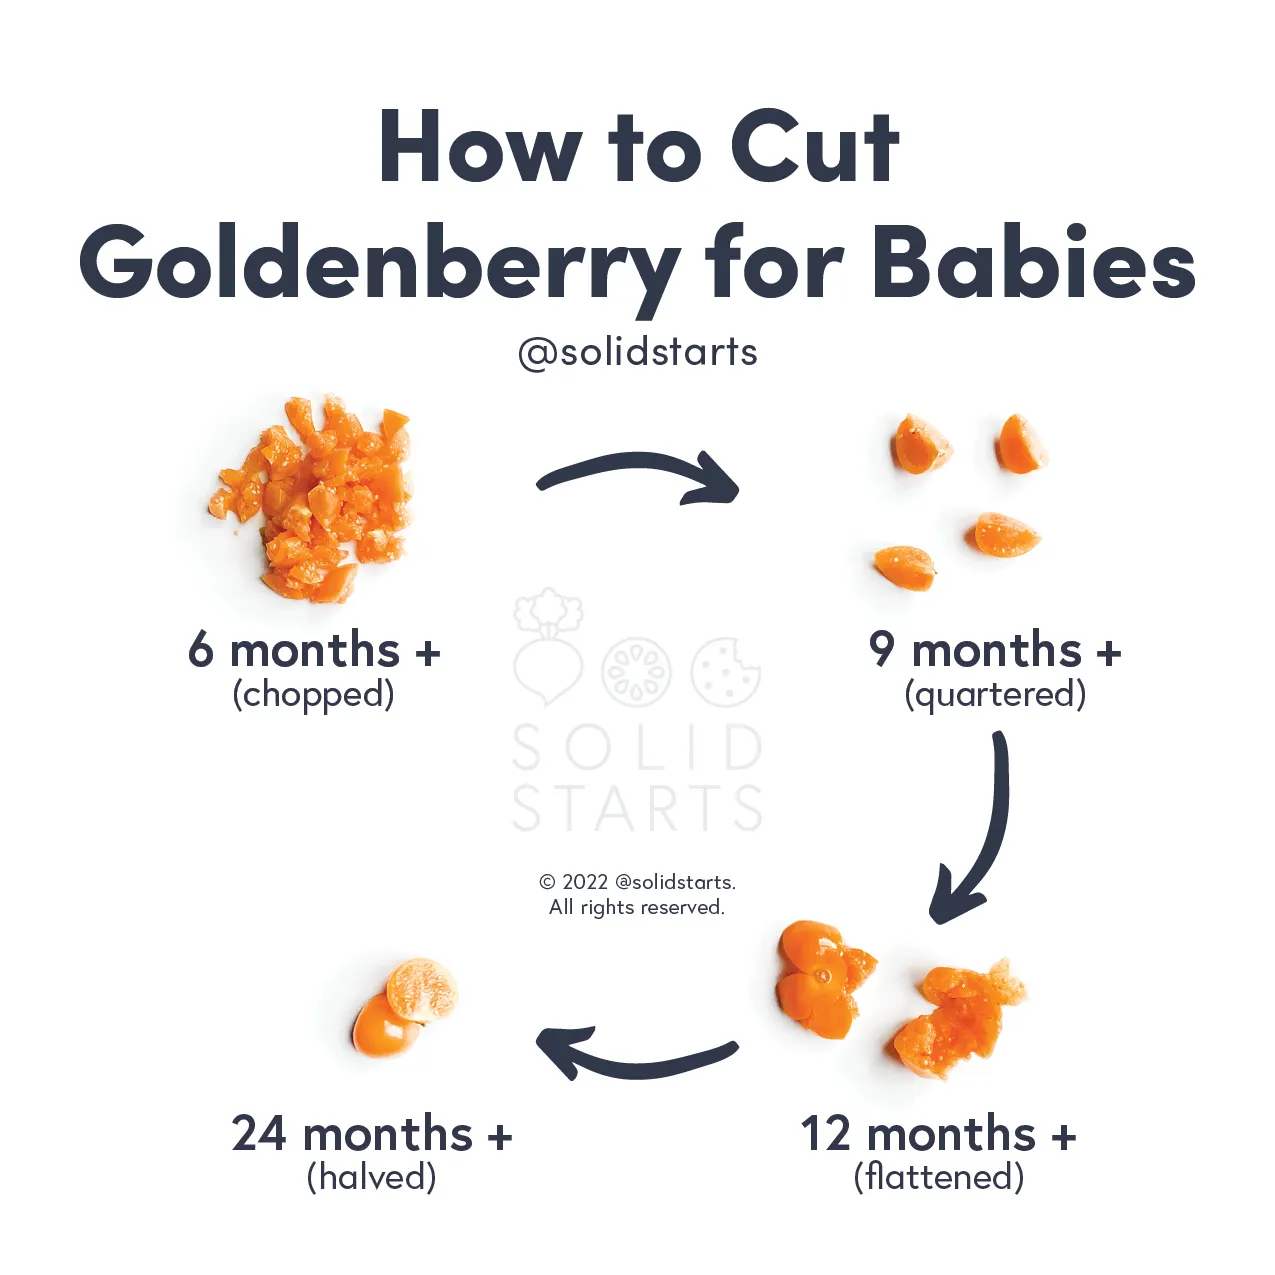 a Solid Starts infographic with the header How to Cut Goldenberries for Babies: chopped for 6 months+, quartered for 9 months+, flattened for 12 months+, and halved for 24 months+